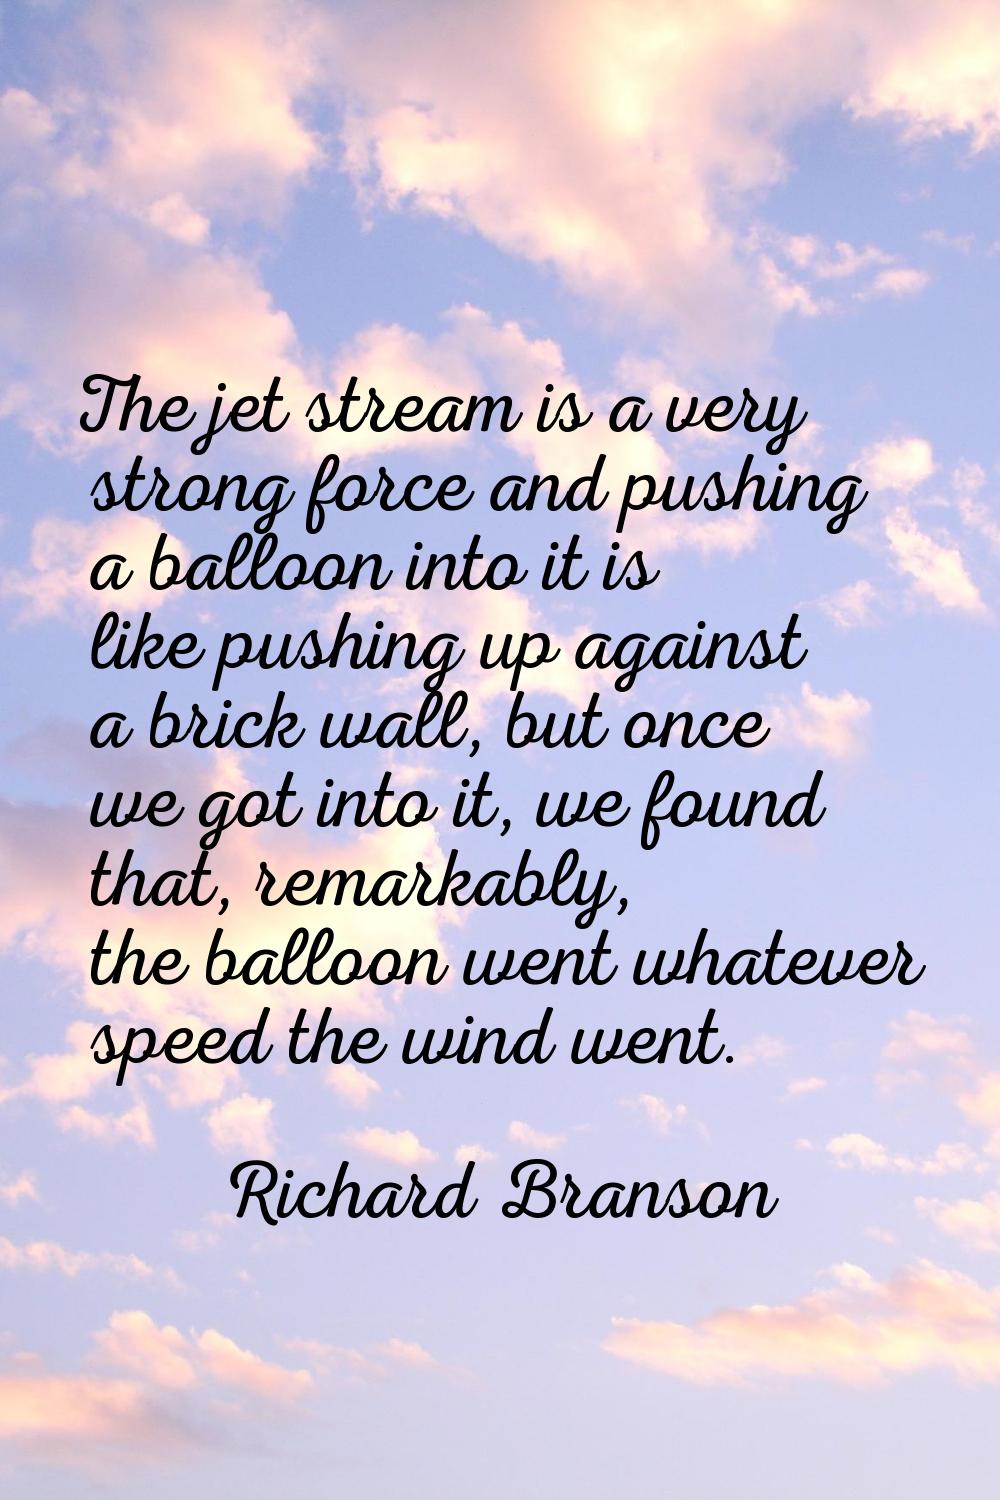 The jet stream is a very strong force and pushing a balloon into it is like pushing up against a br